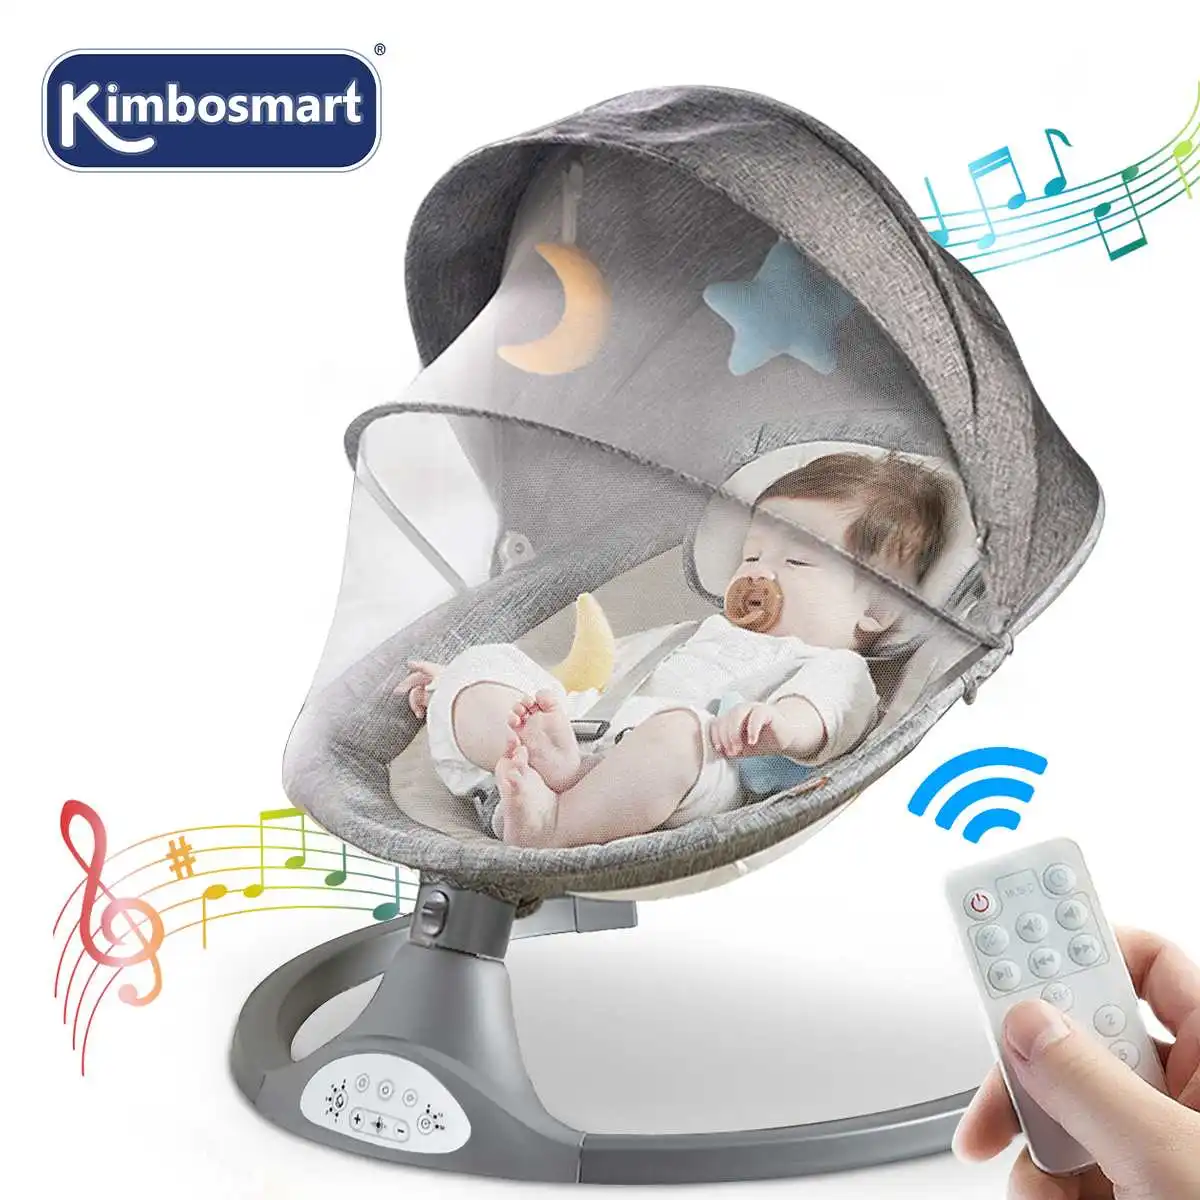 Baby Rocking Chairs Baby Swing for Children Chaise Longue for Baby Bouncer Baby Cradle with bluetooth Music Remote Control